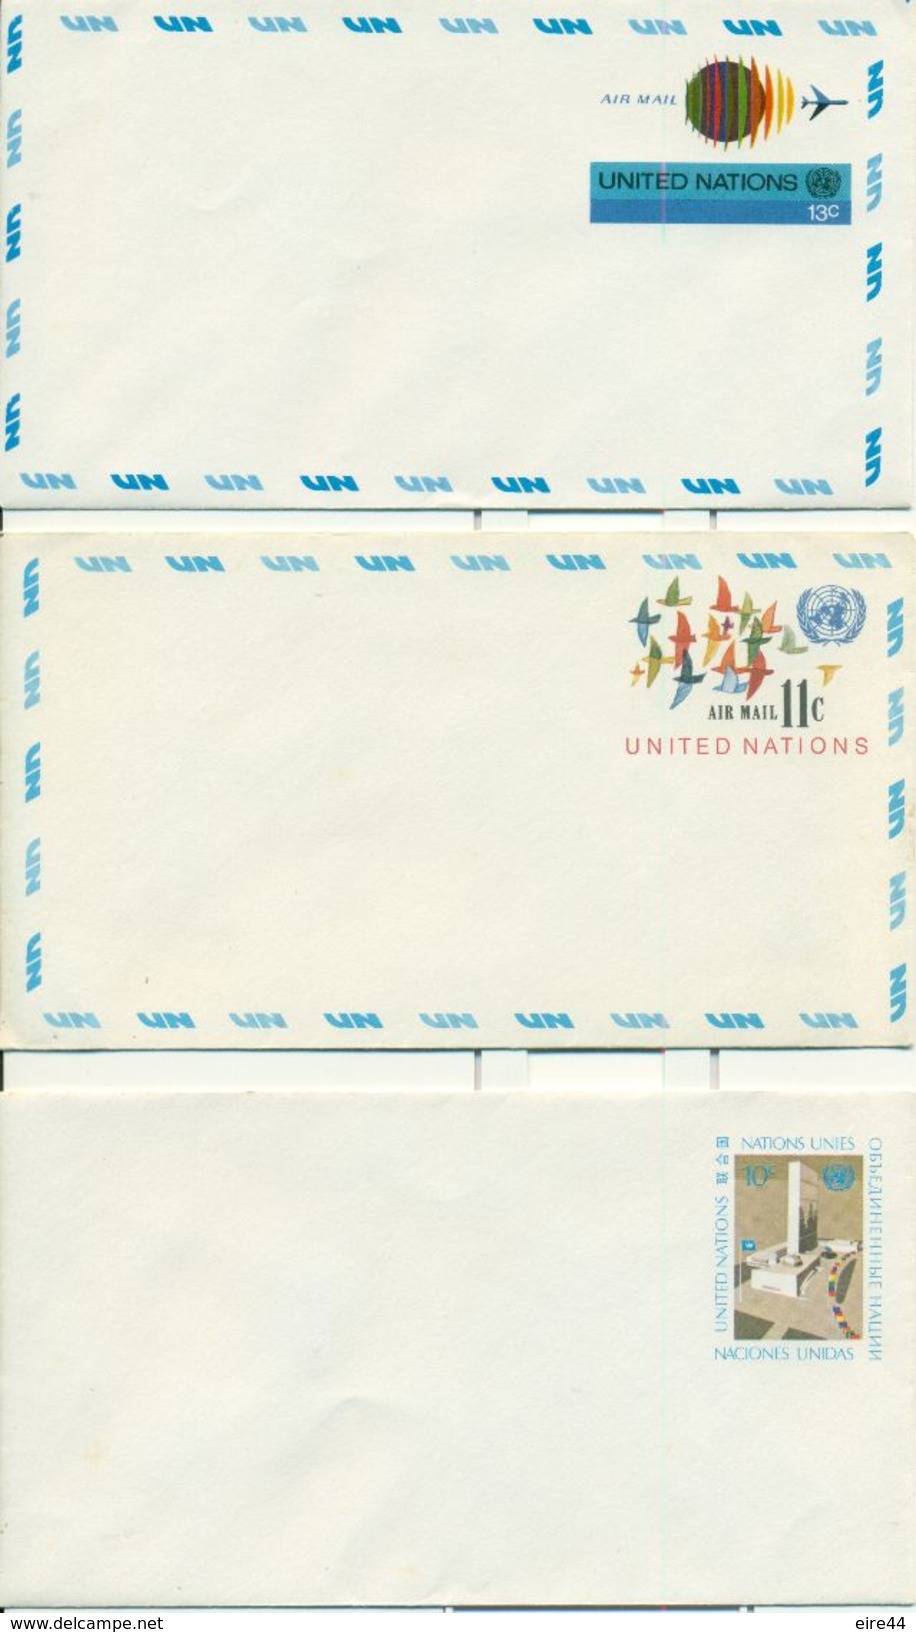 United Nations New York  9  Postcards Mint Airmail Postal Stationery - Airmail